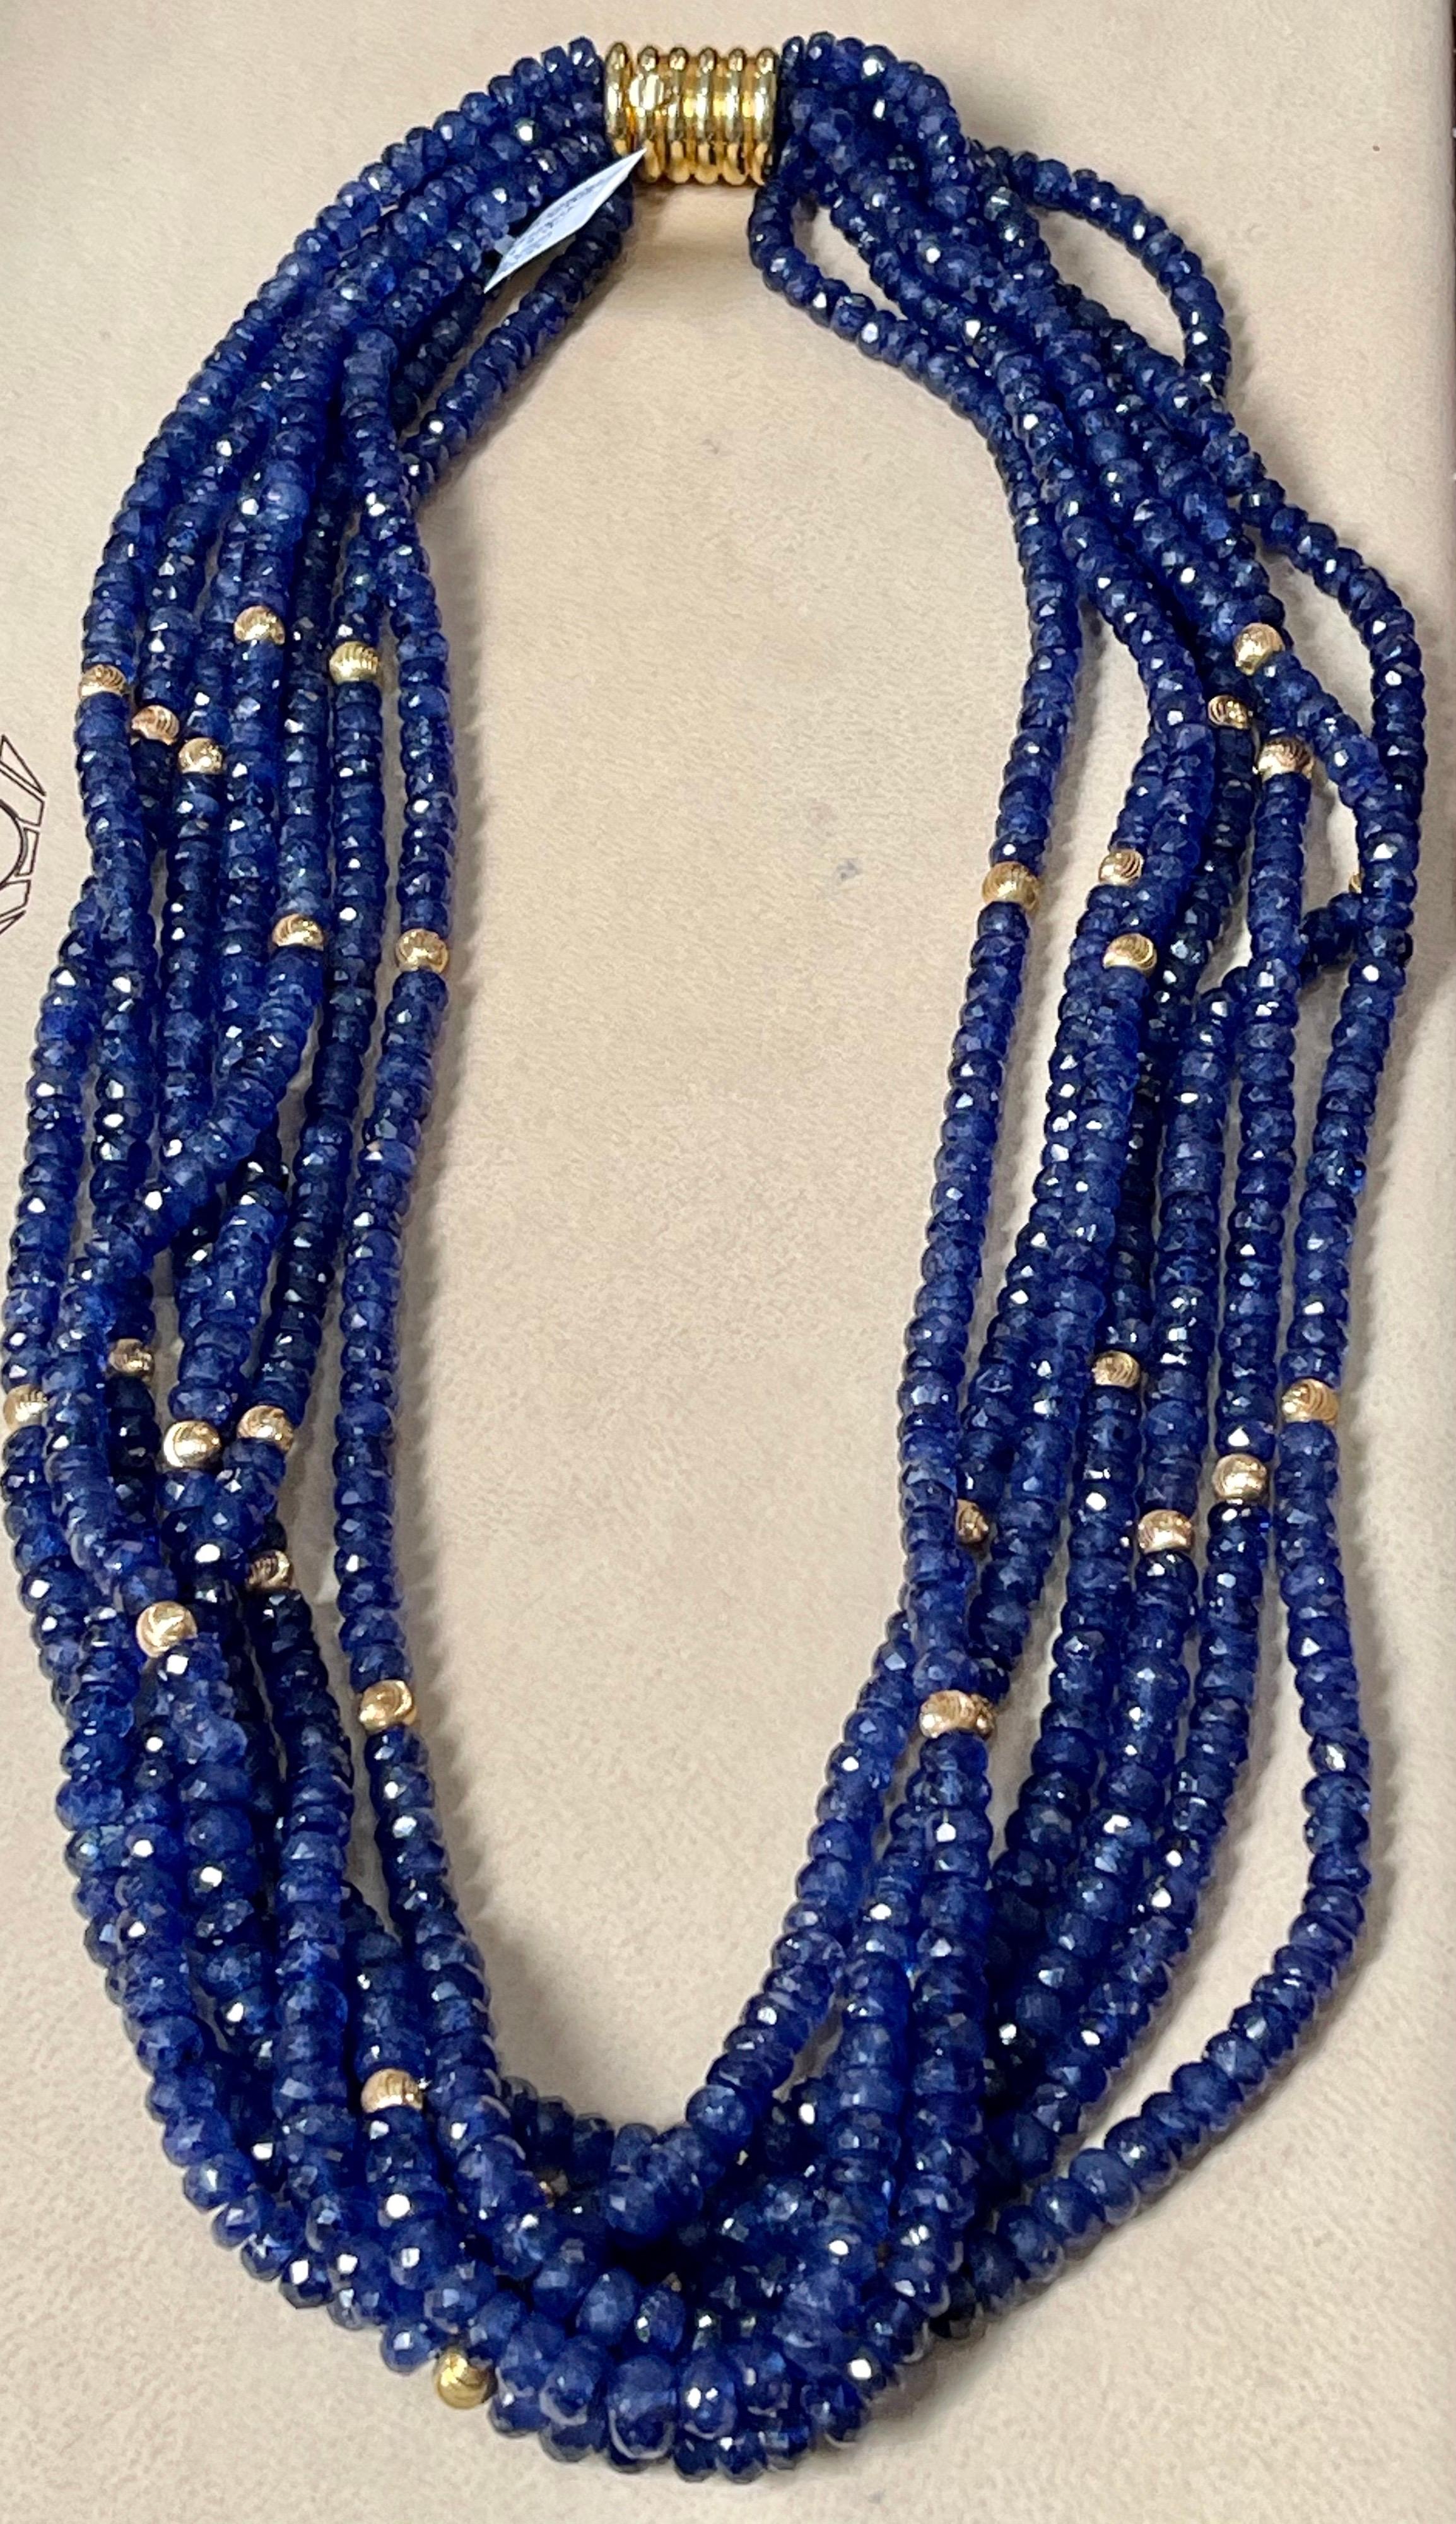 Twisted 1275 Ct Natural Tanzanite Bead Seven Strand Necklace + 15 Gm 14 K Y Gold For Sale 4